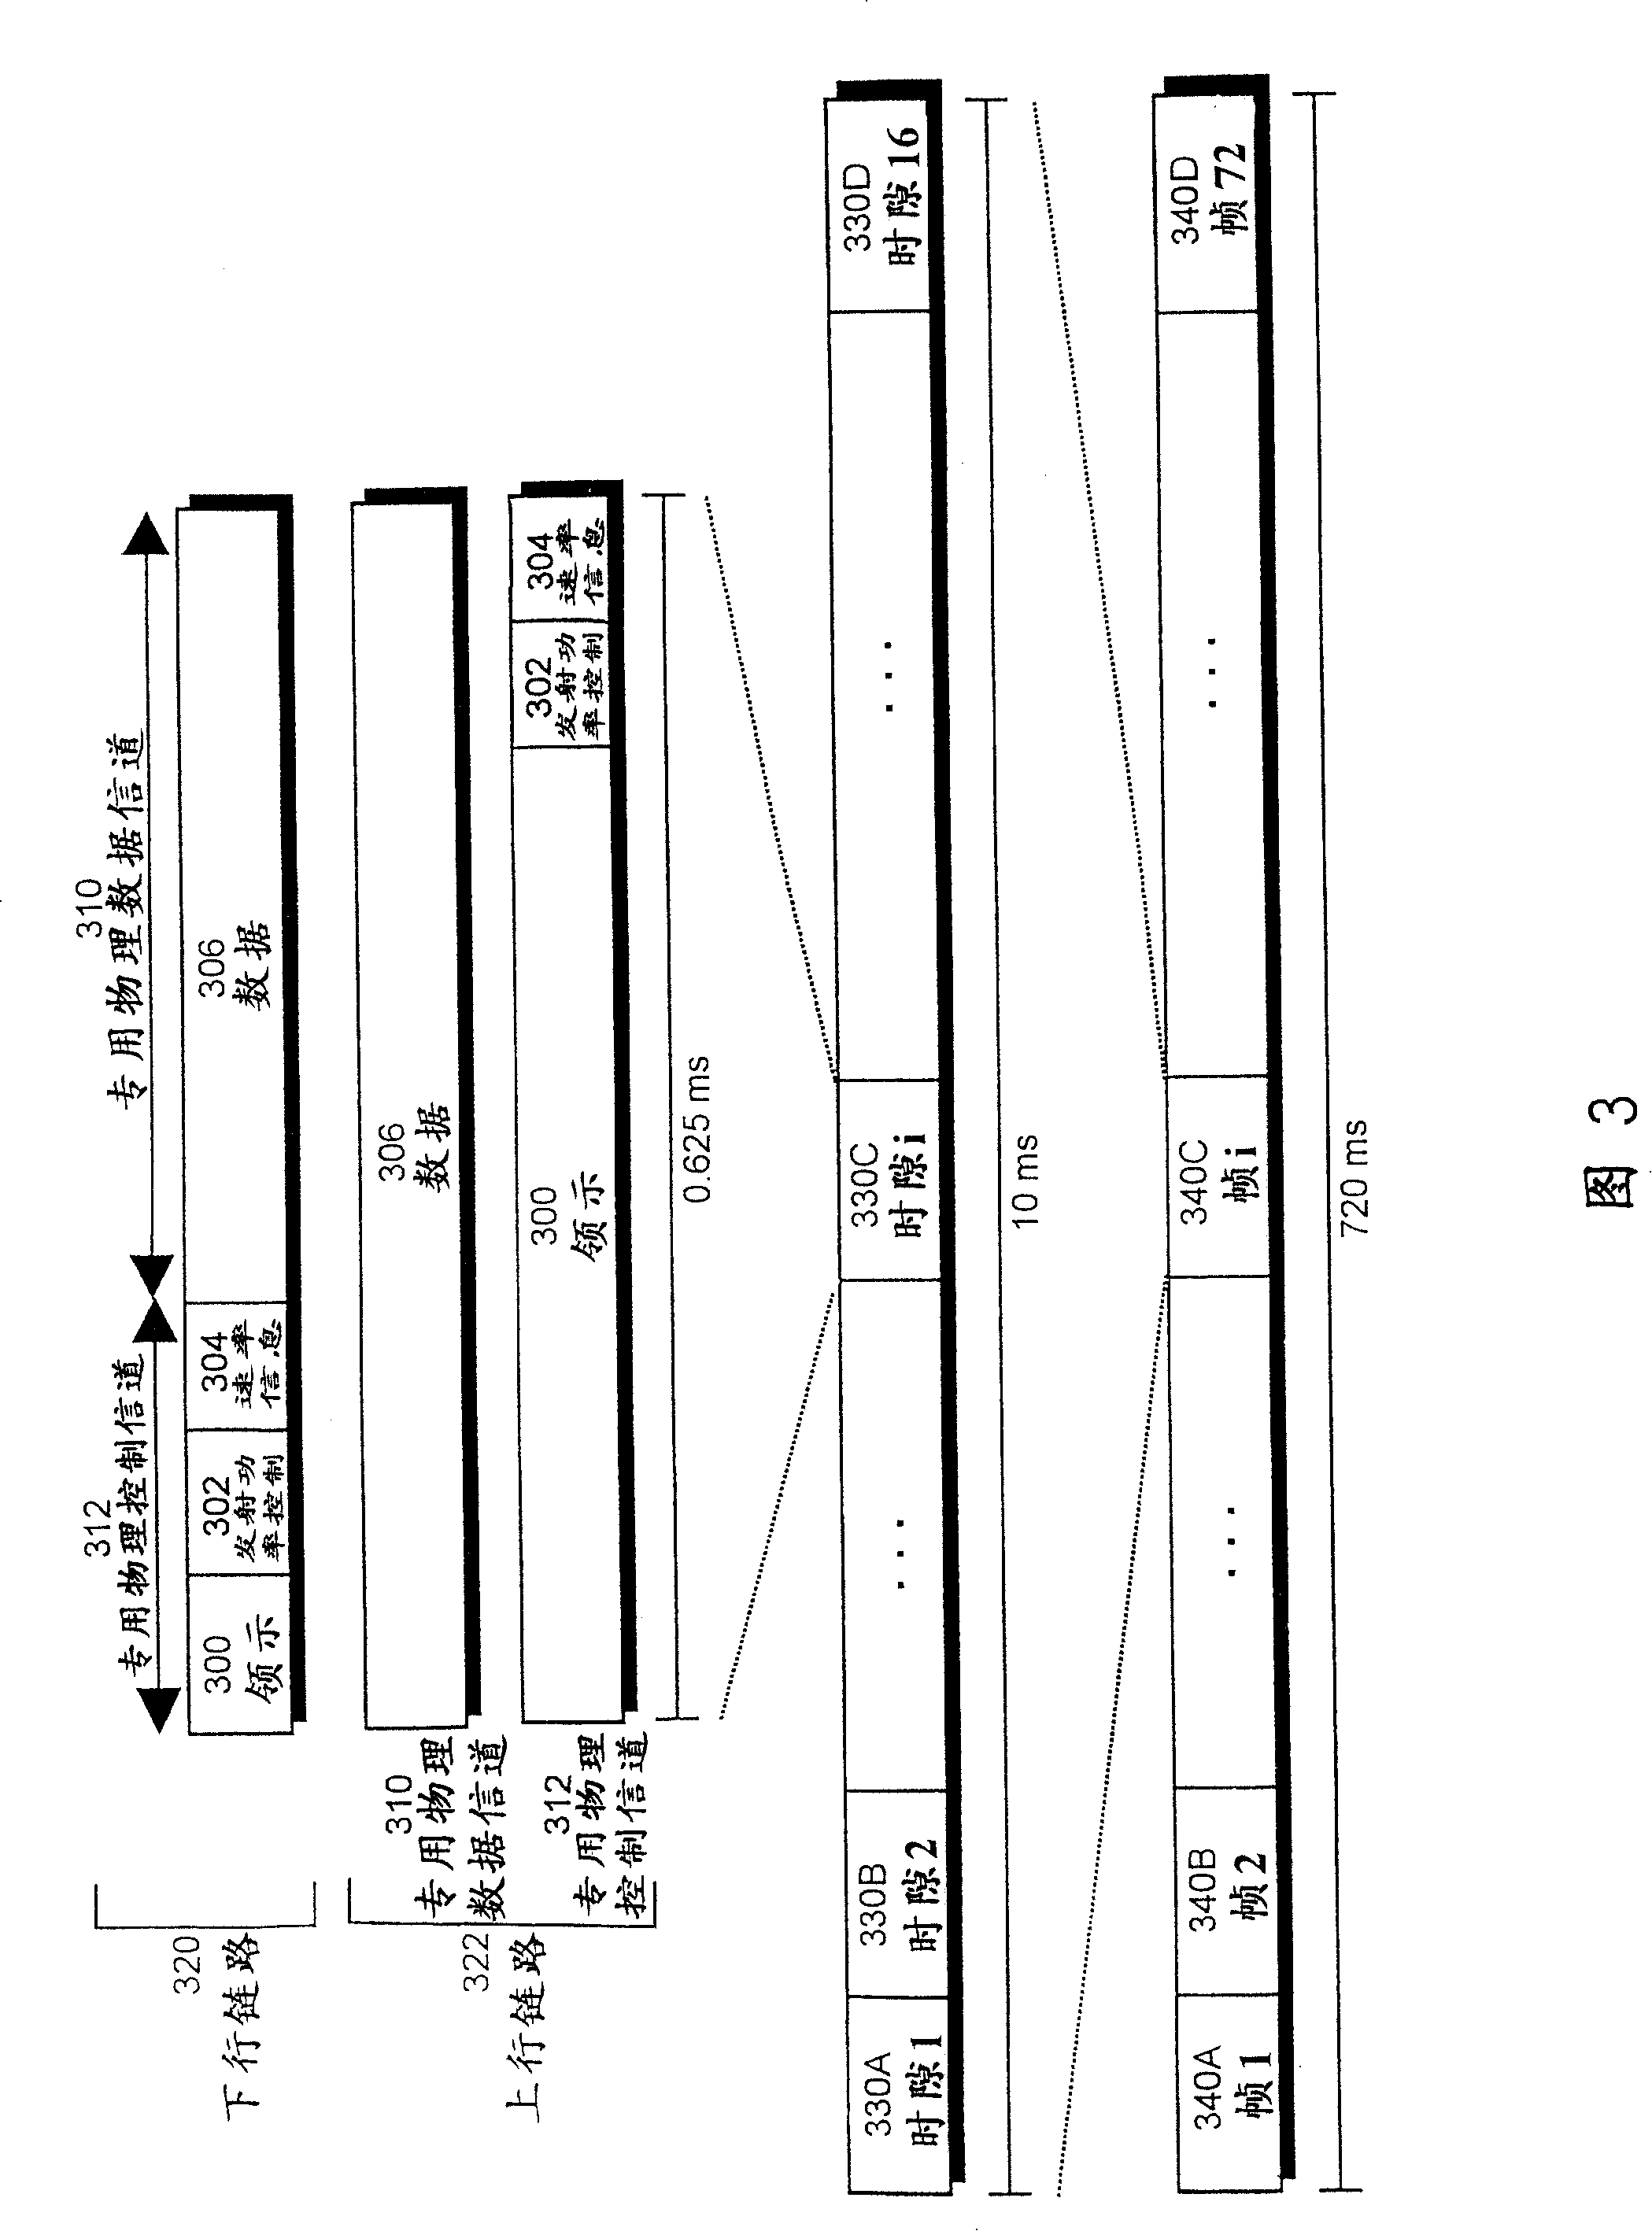 Method of physical radio channel power control